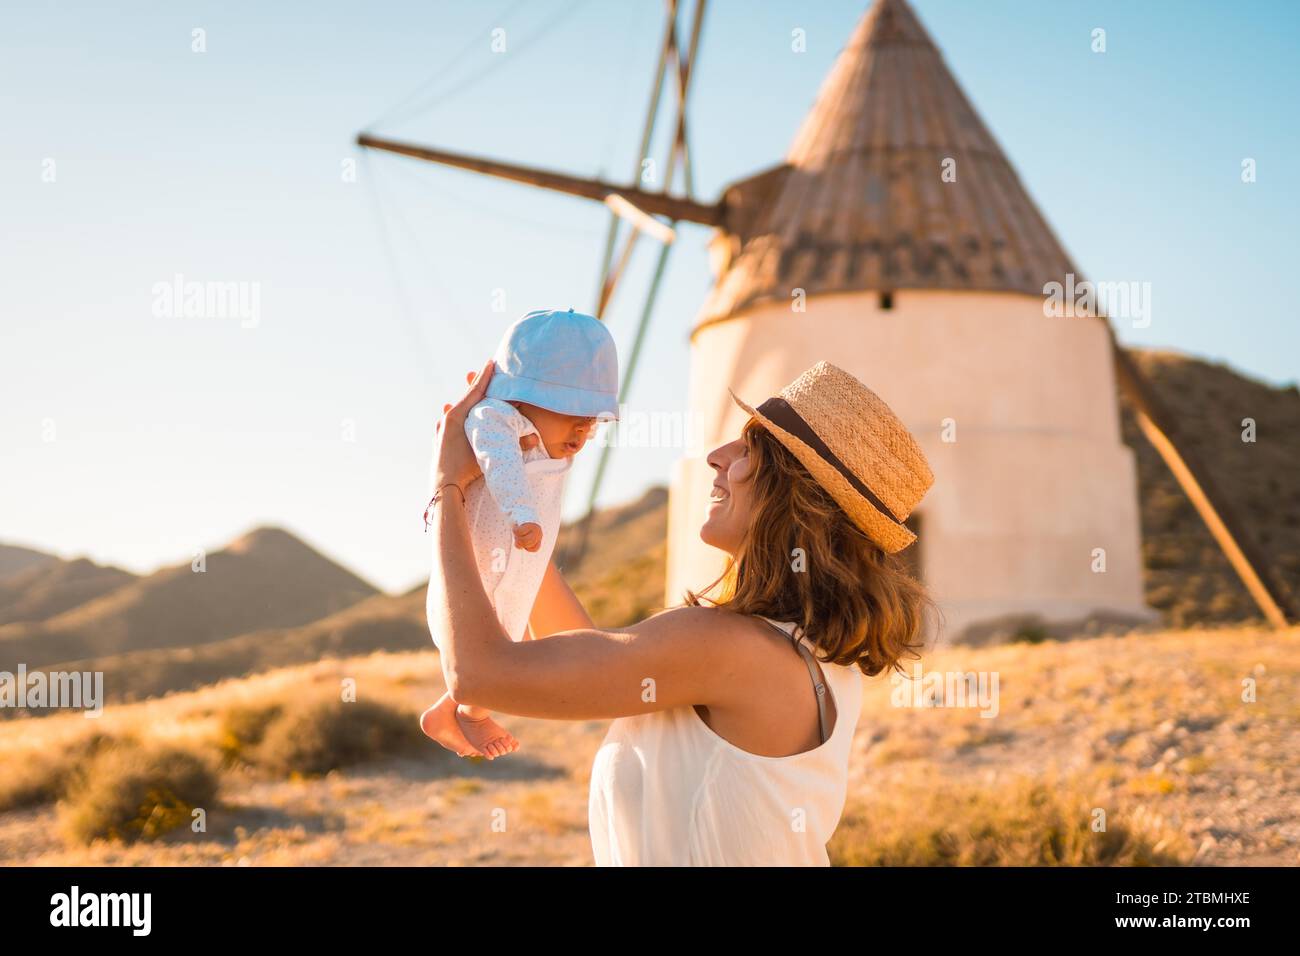 Mother raising a baby in arms next to a windmill in Cabo de Gata, Spain Stock Photo